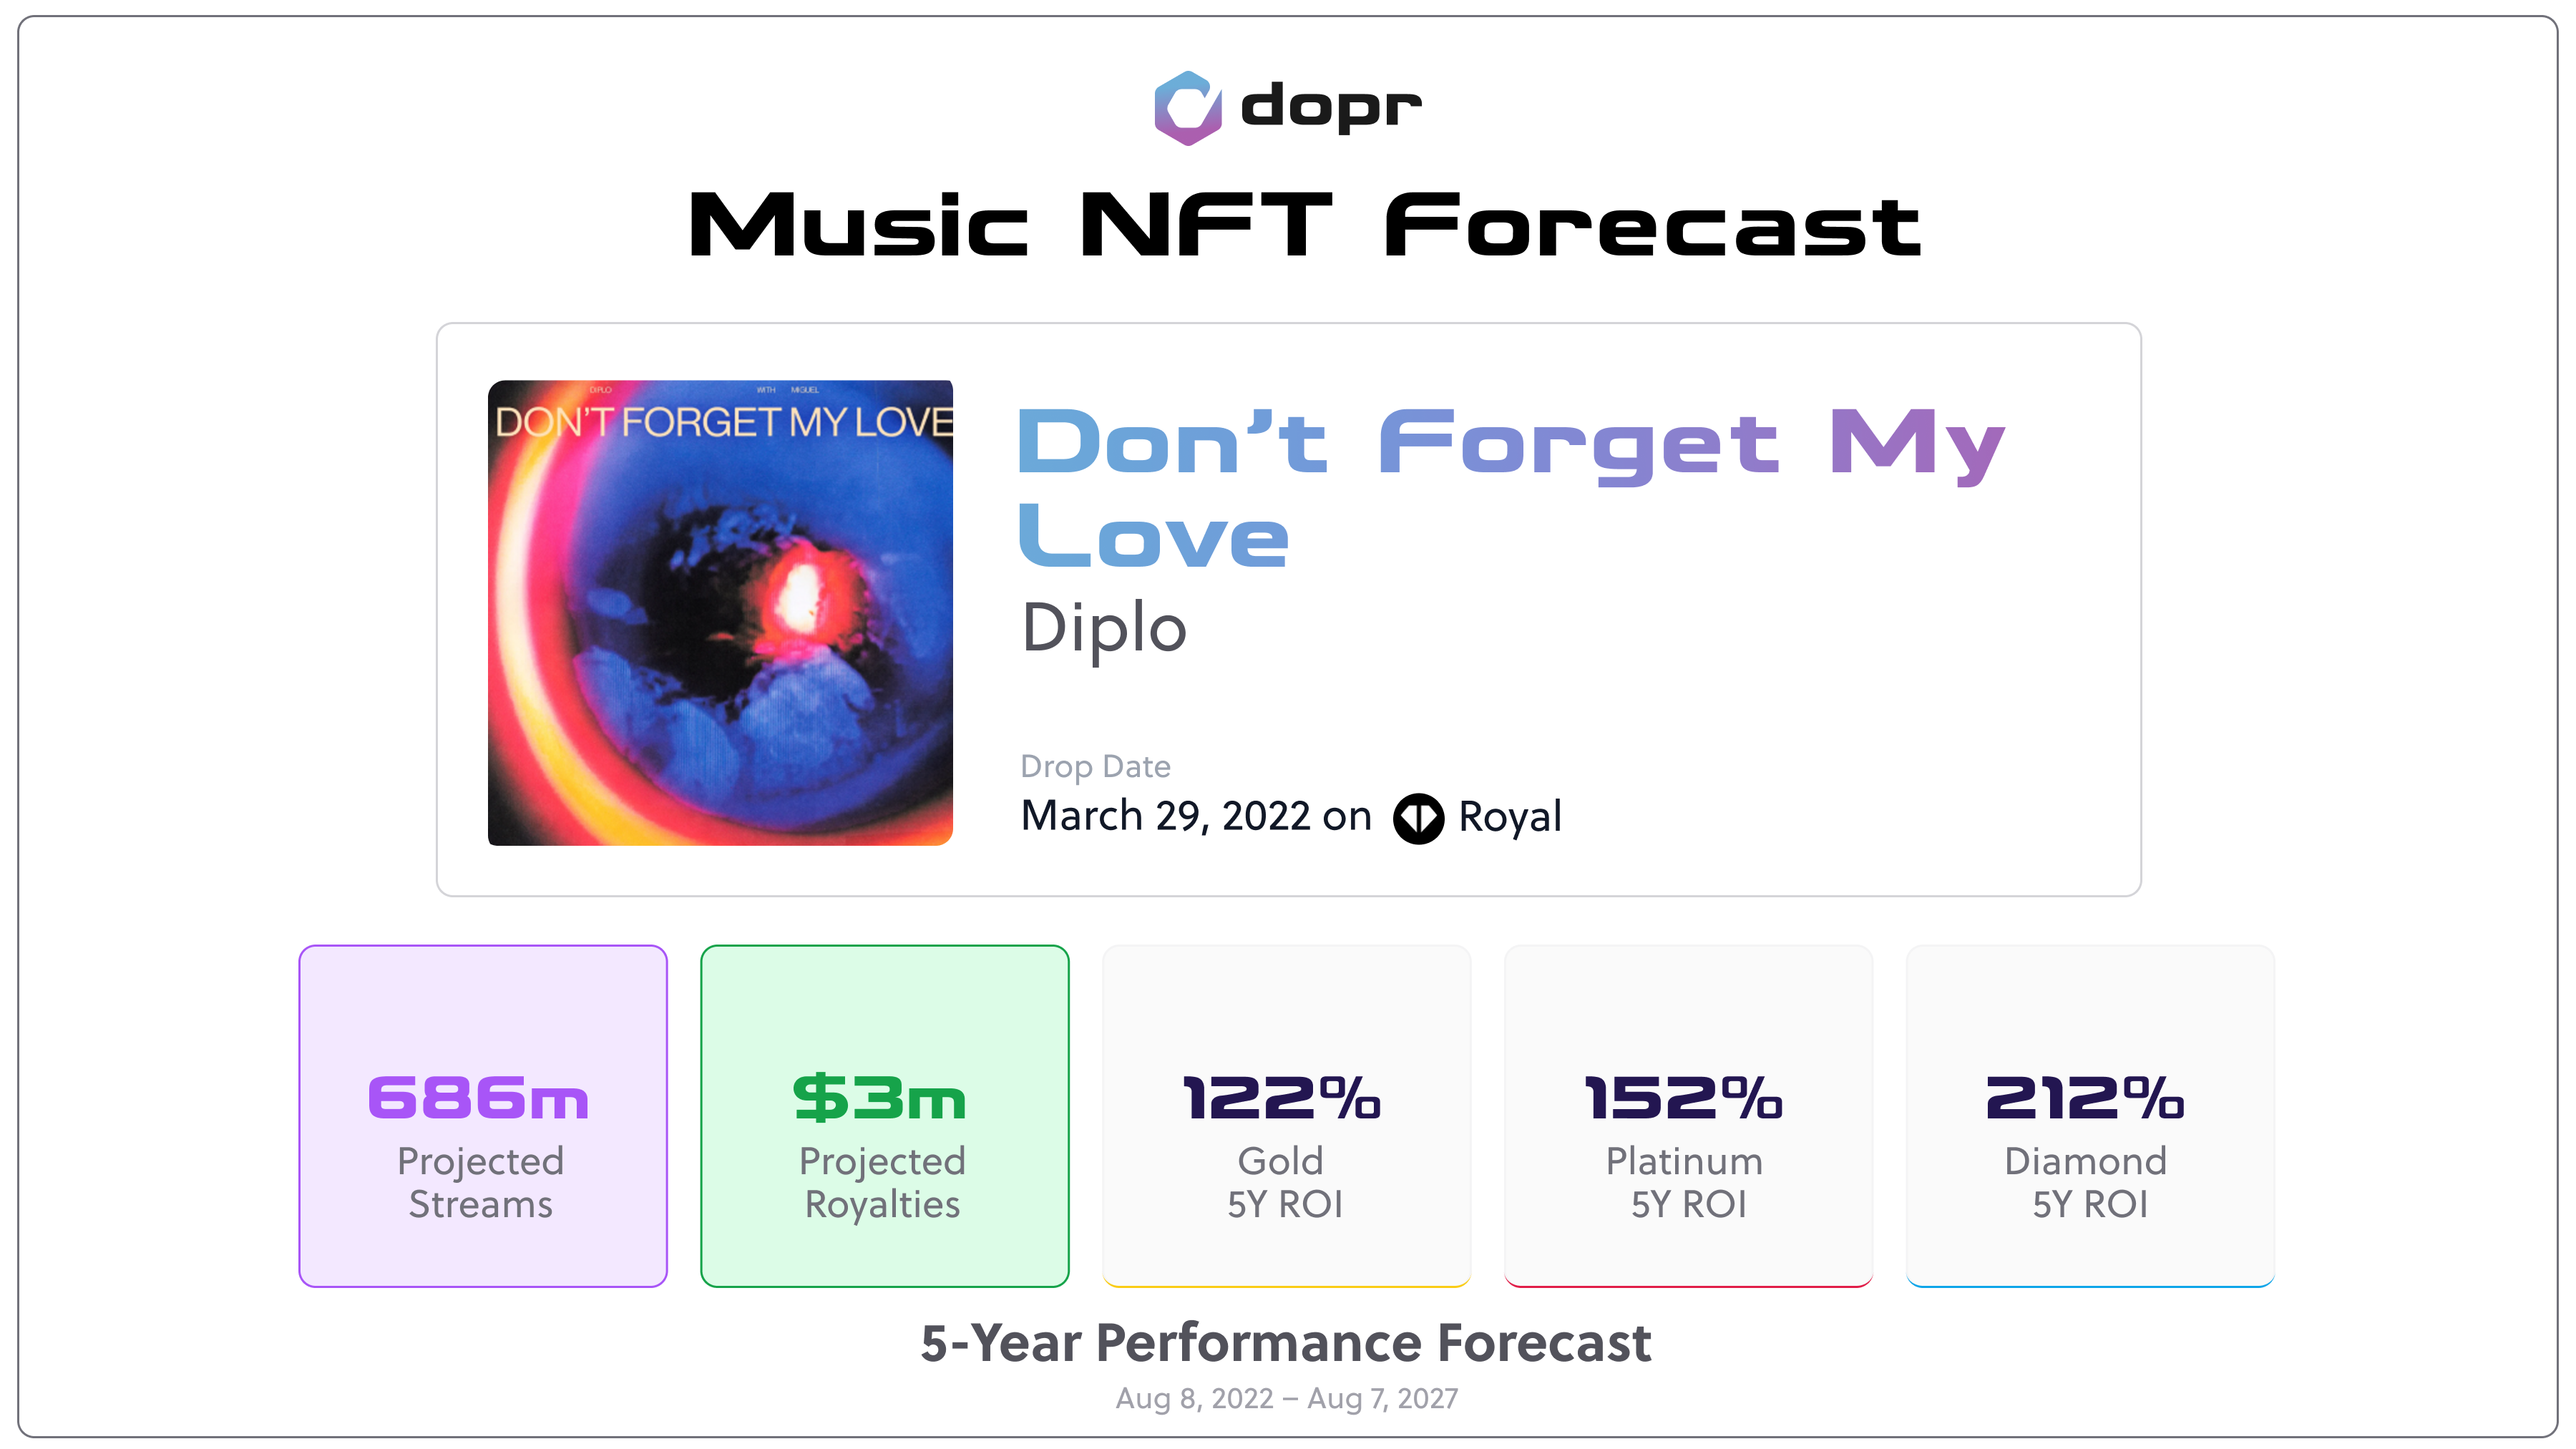 5-year performance forecasts for streams, royalties and token earnings on Diplo's drop "Don't Forget My Love" via Royal. 